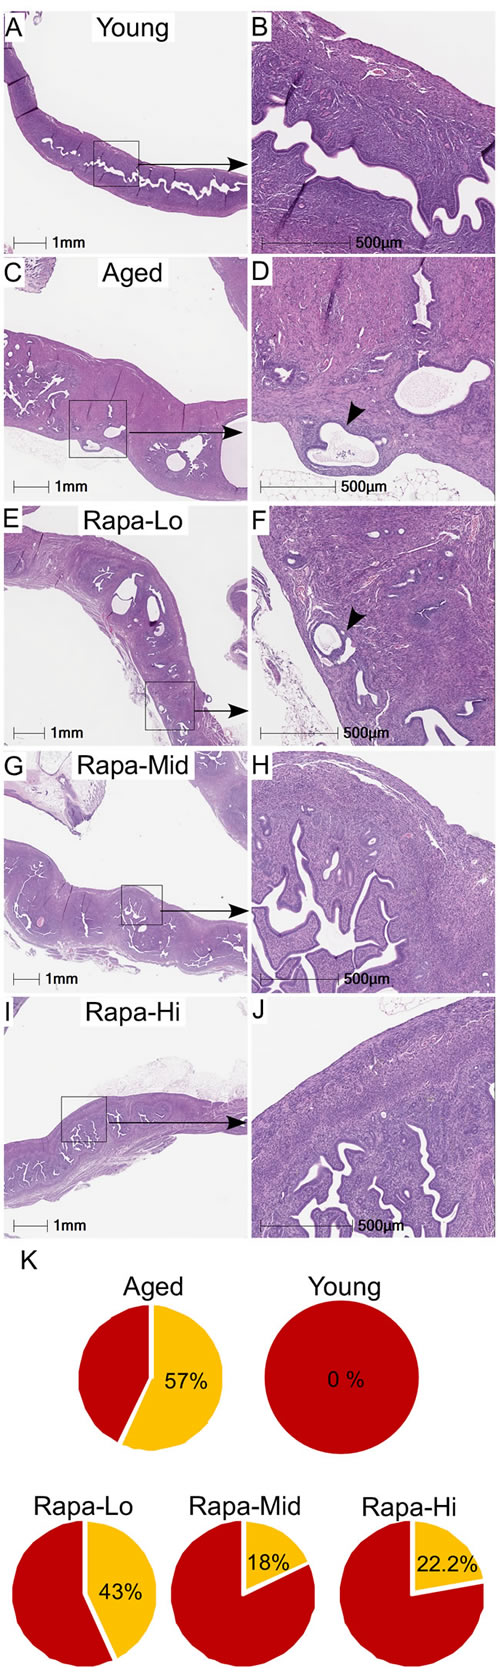 Chronic rapamycin treatment suppresses age-associated hyperplastic changes in the mouse uterus.